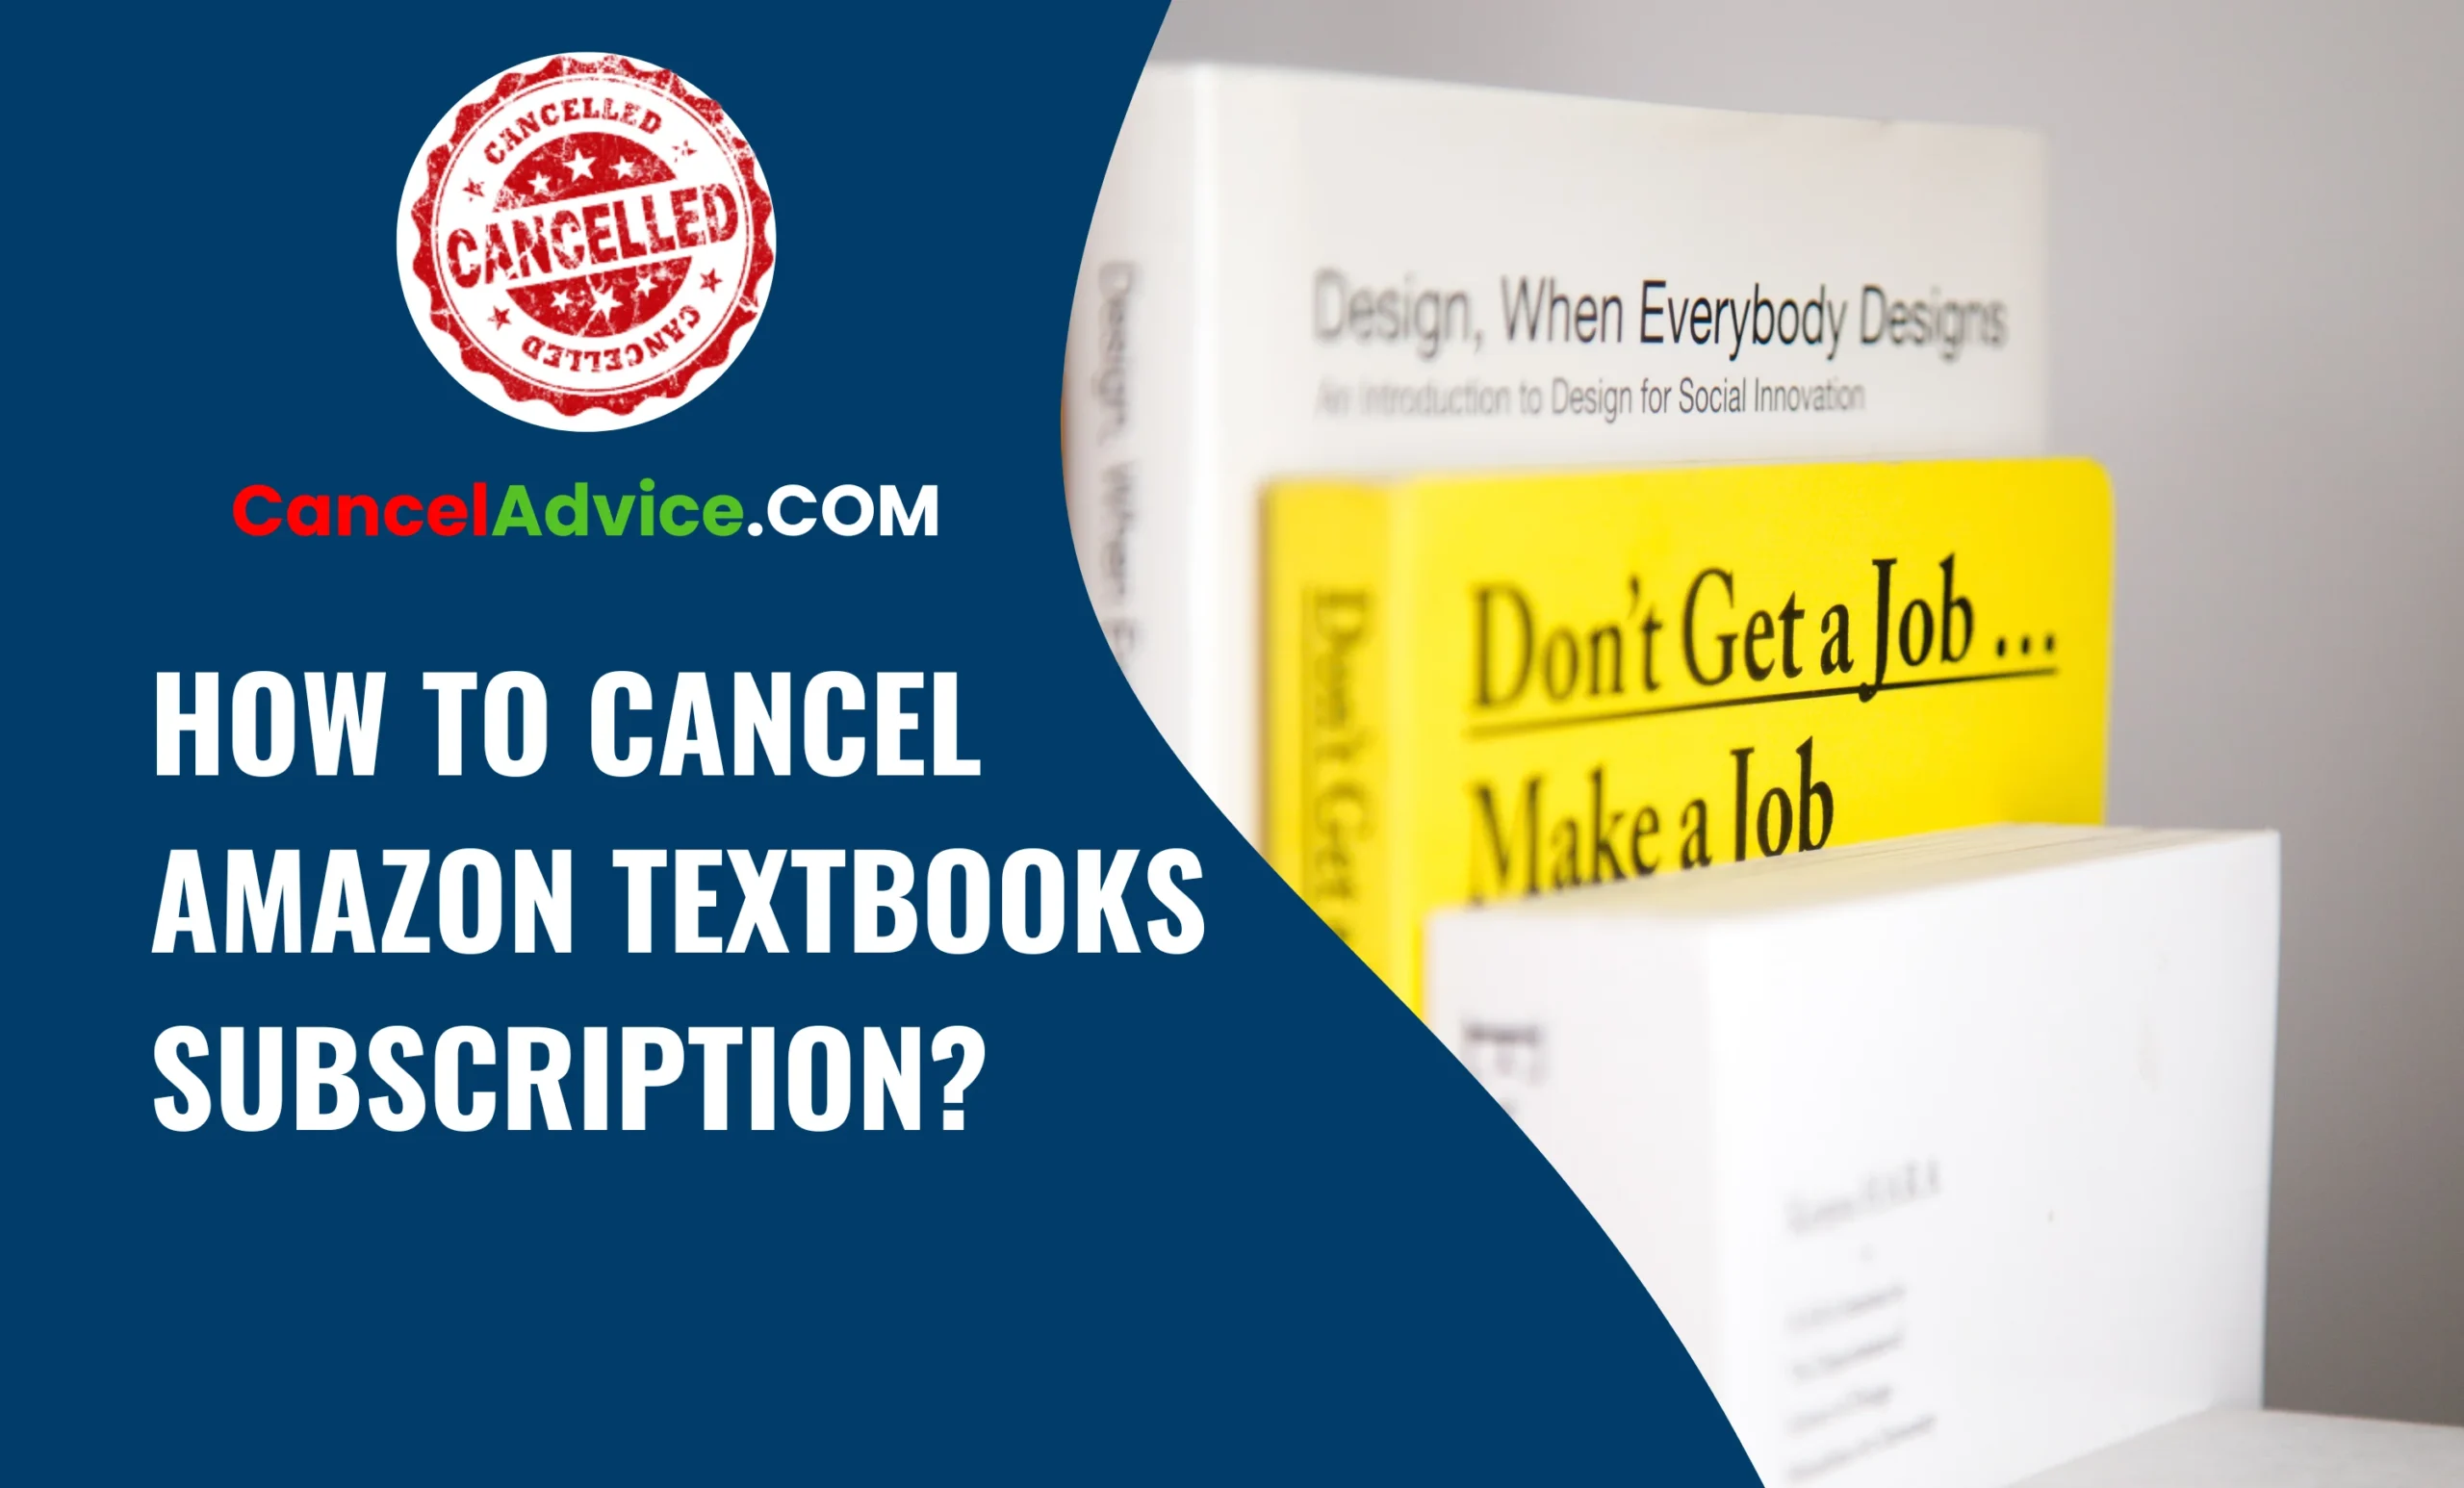 How To Cancel Amazon Textbooks Subscription